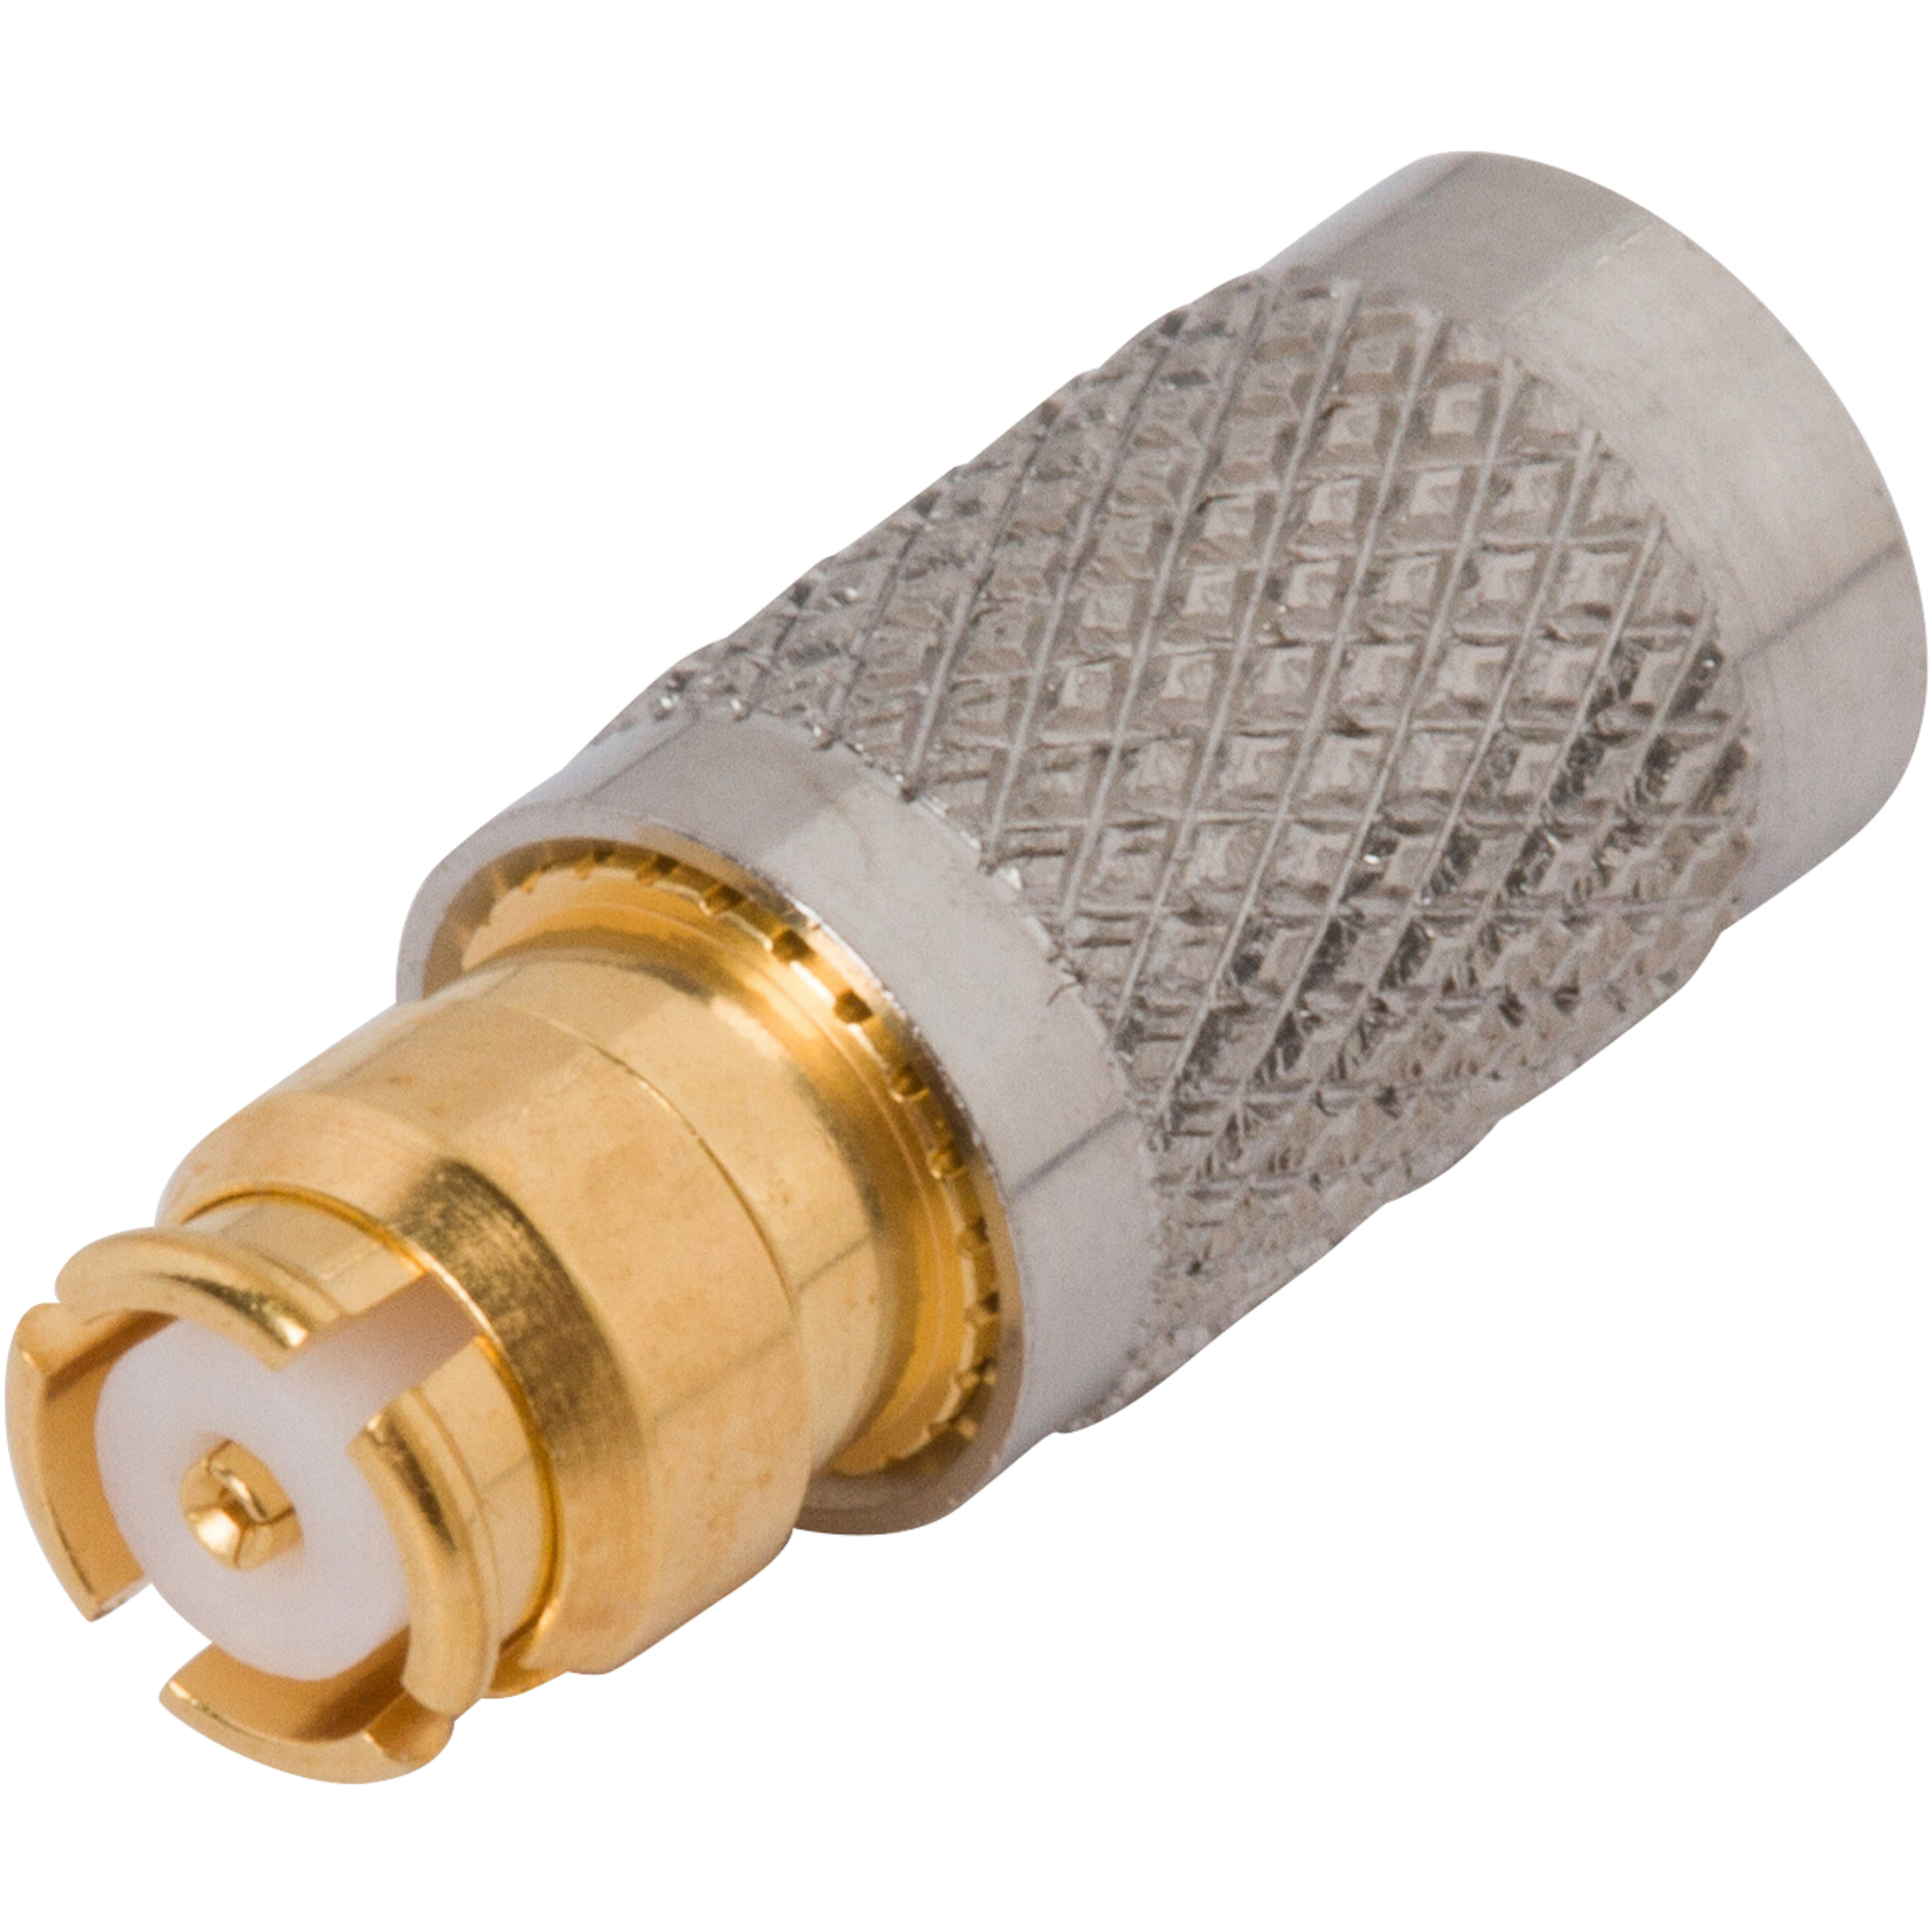 SMP Male to Female Adapter, SB, 1112-4012